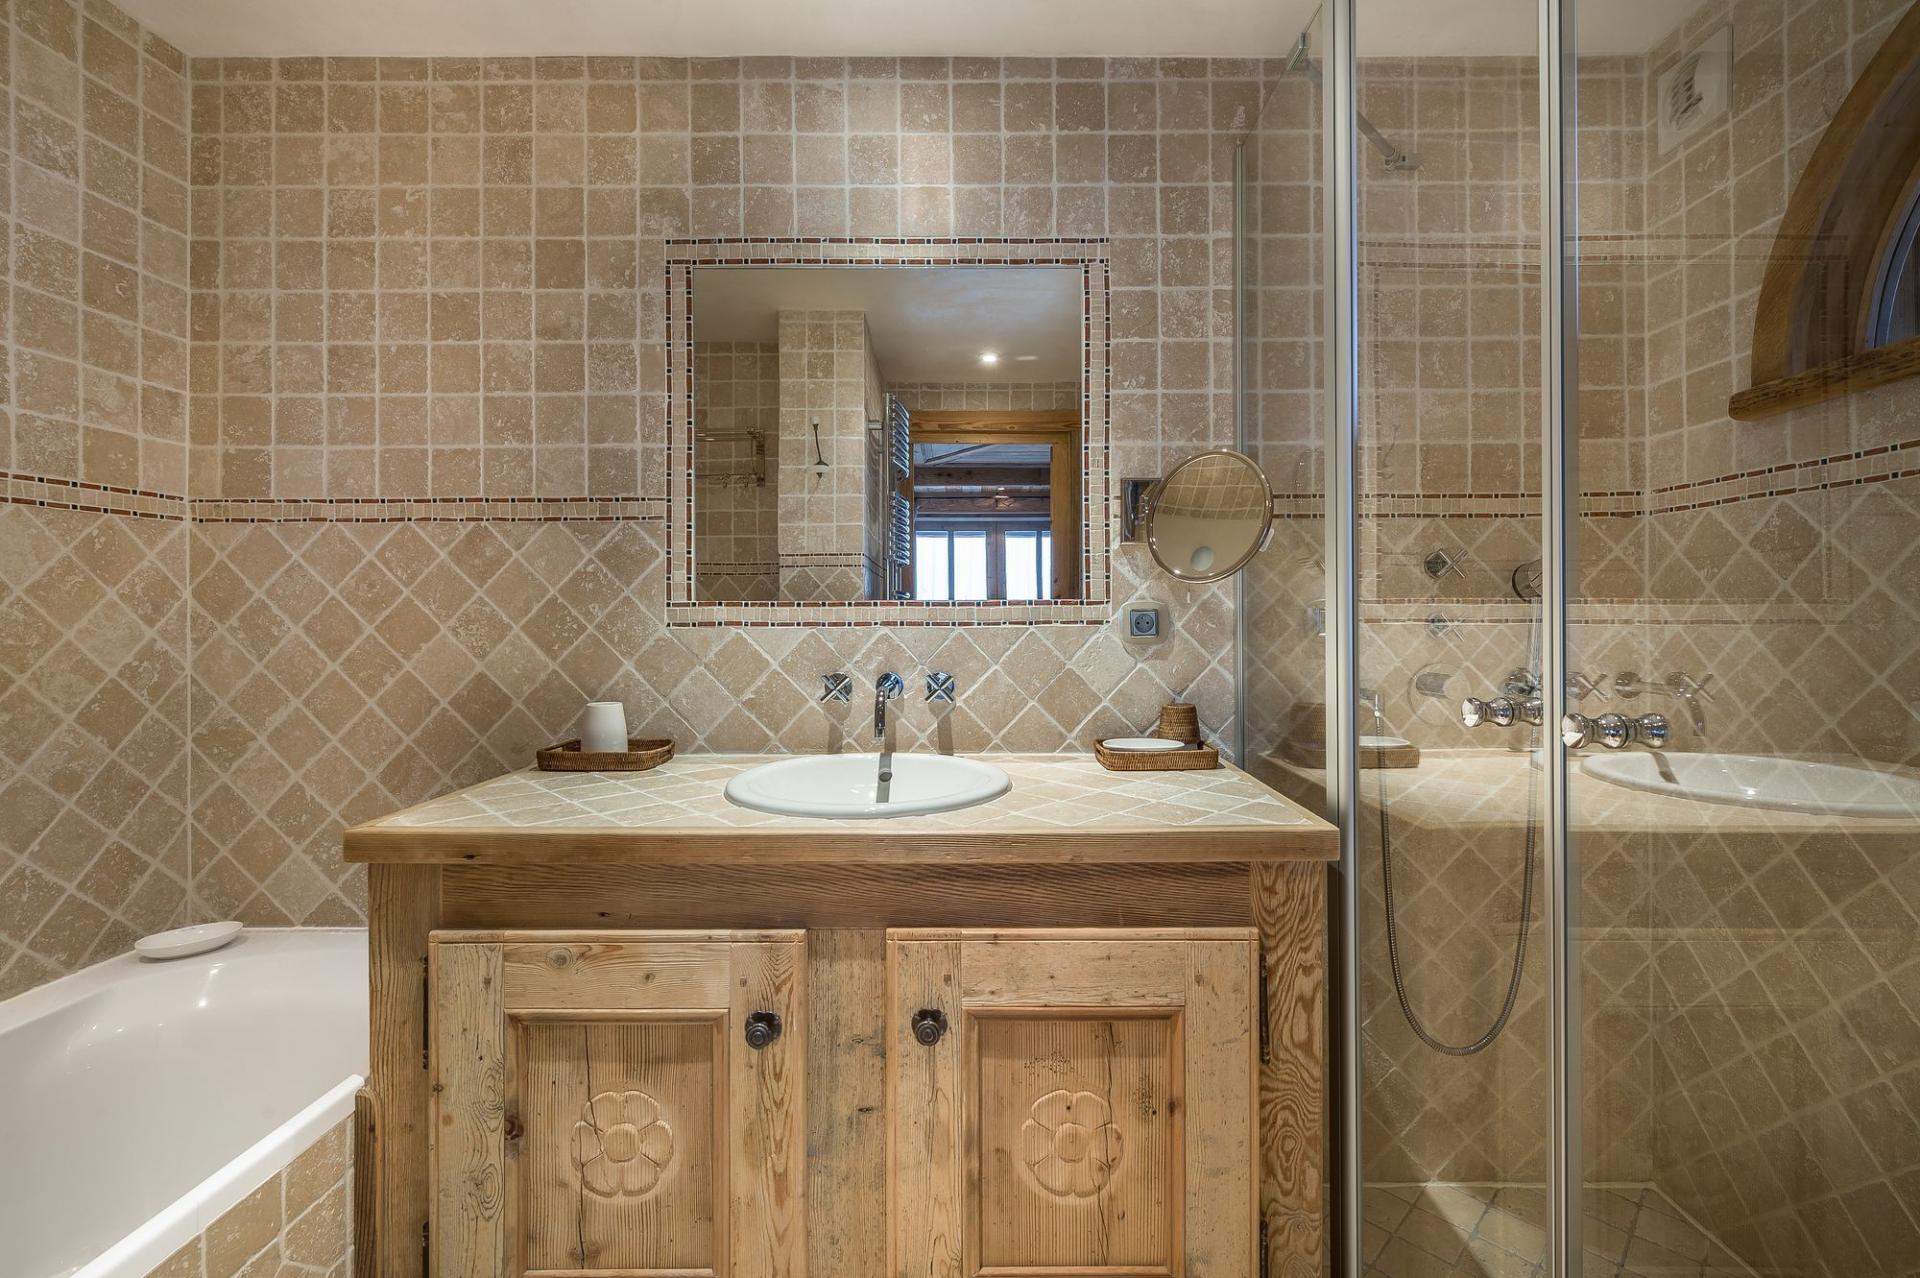 ONE BATHROOM IN A CHALET RENTAL IN COURCHEVEL 1850